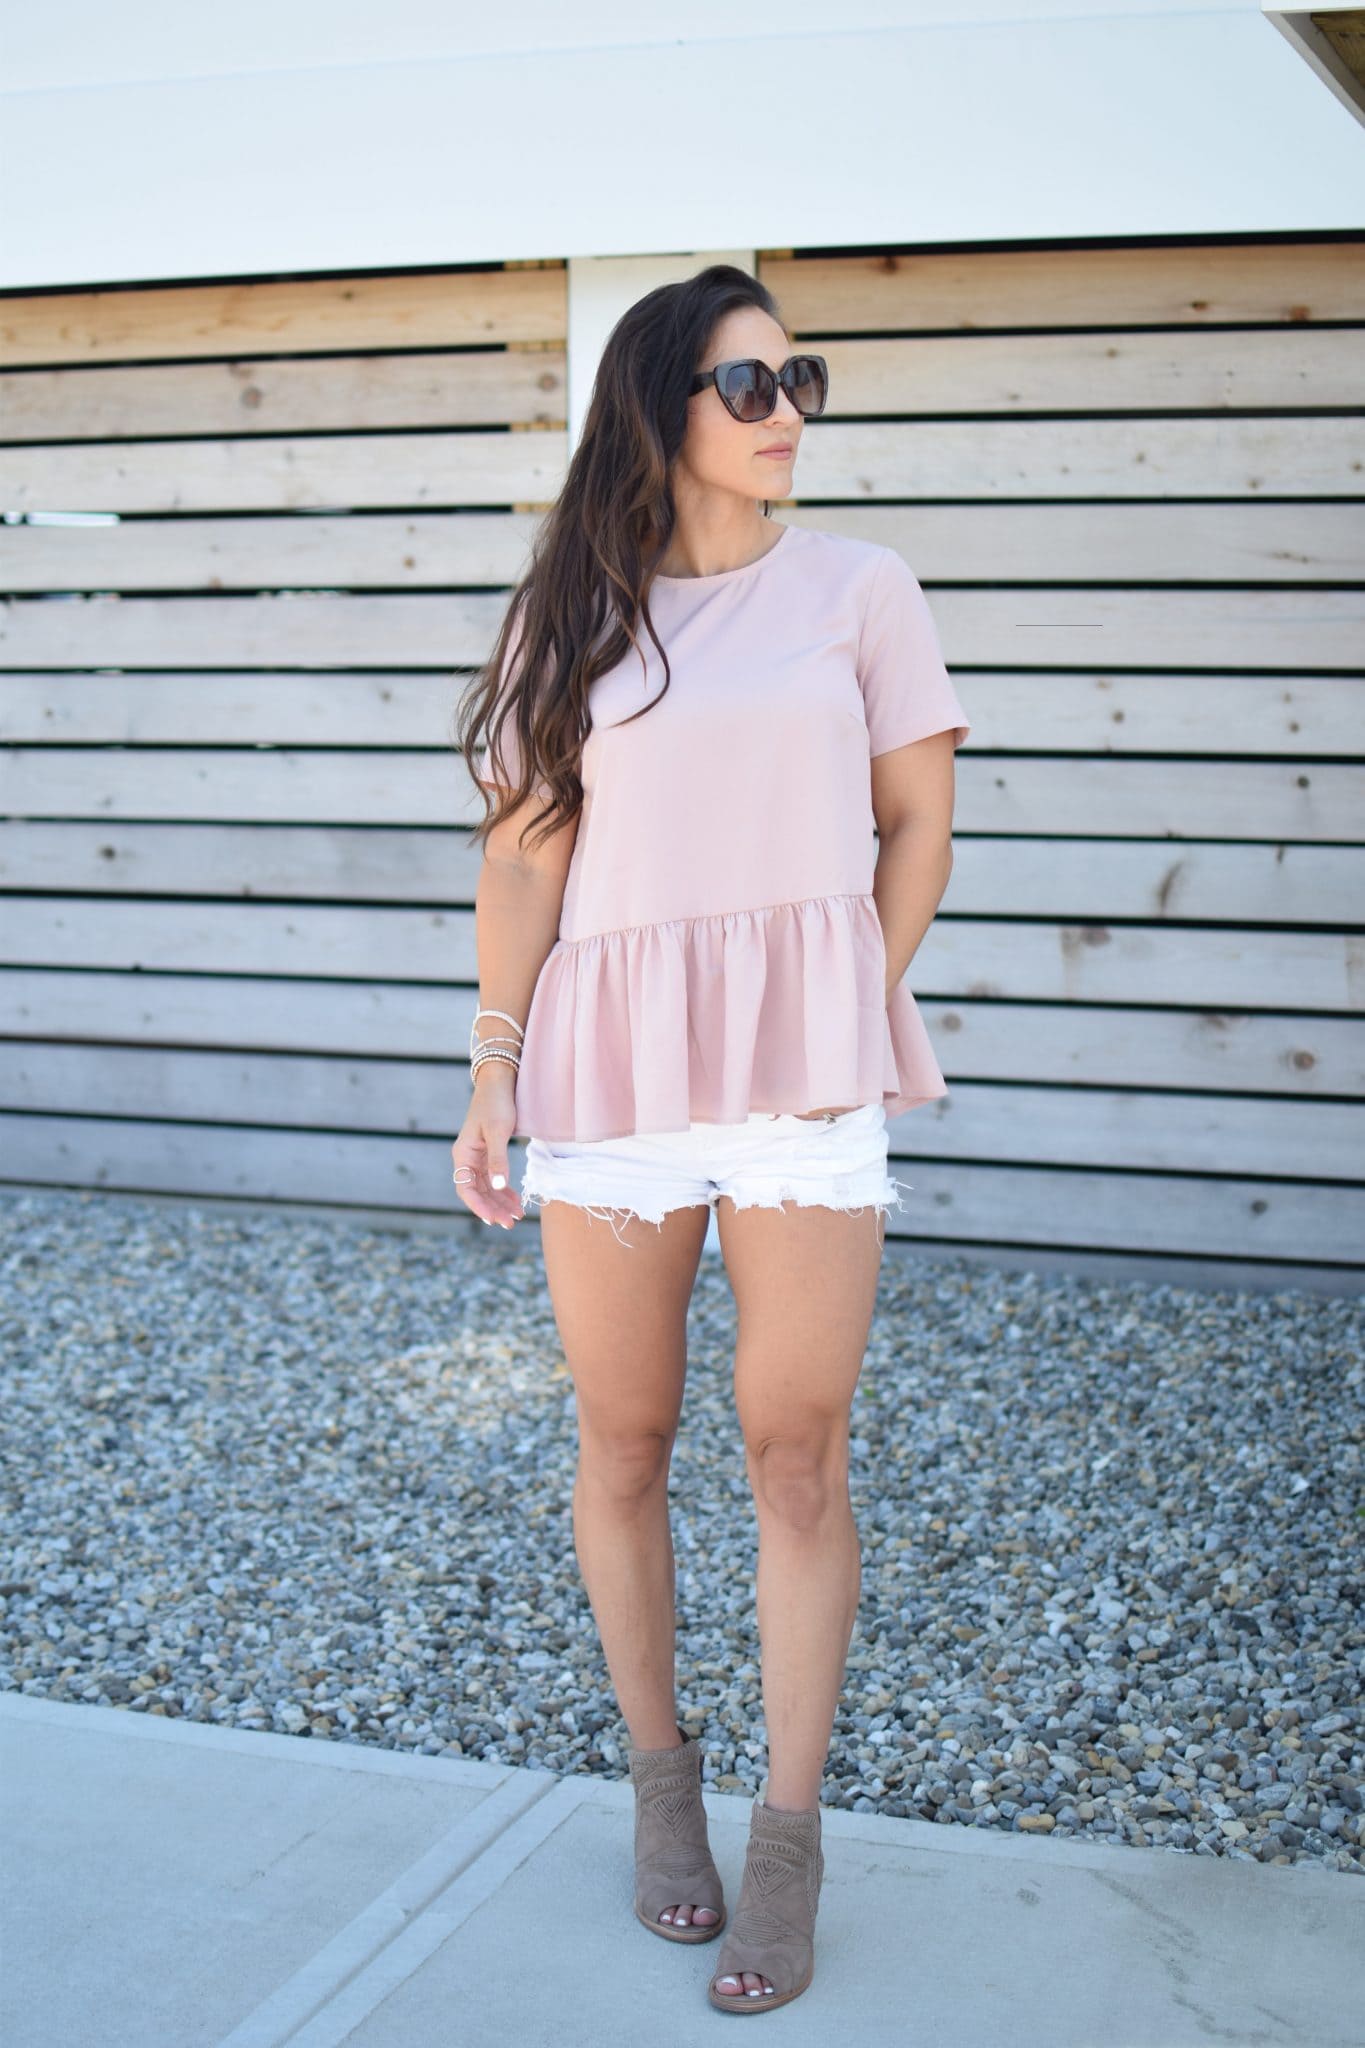 The Pink Peplum Top Every Girl Needs by popular New Jersey fashion blogger Fit Mommy in Heels